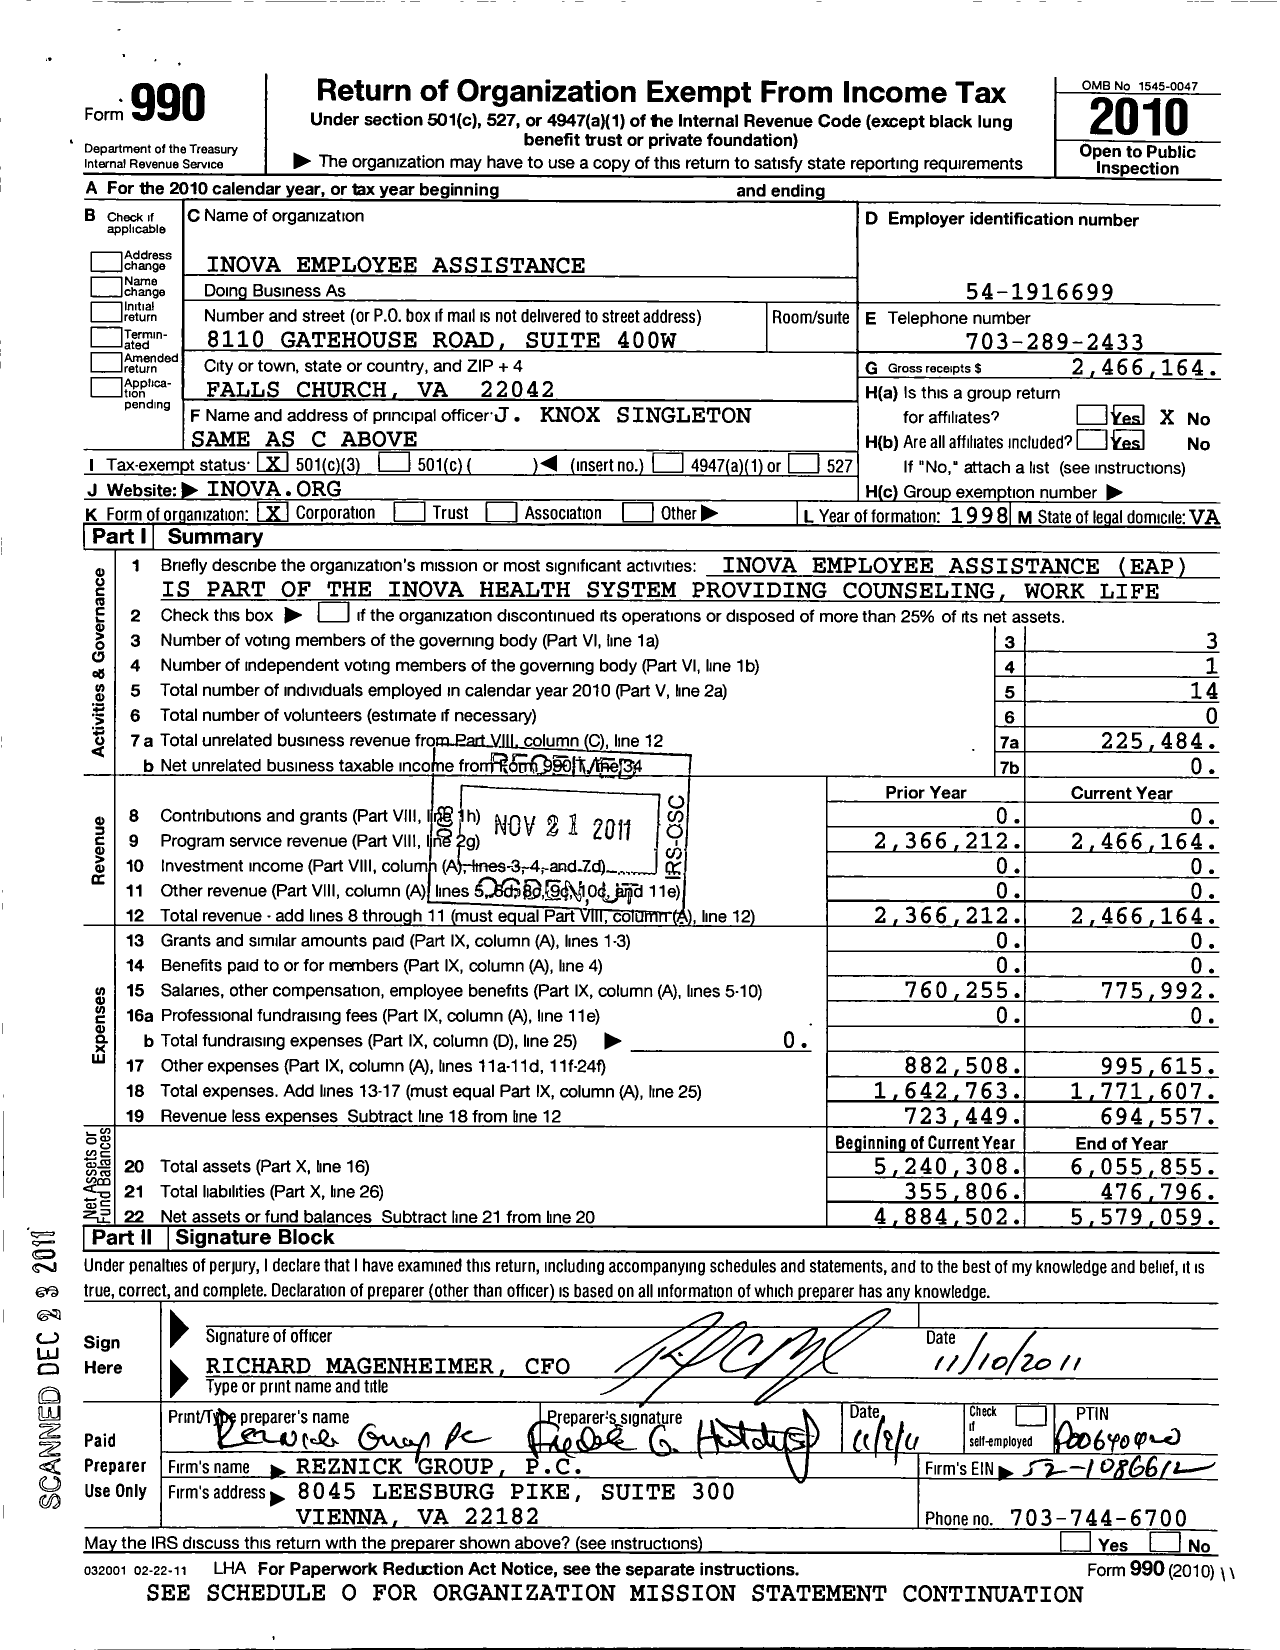 Image of first page of 2010 Form 990 for Inova Employee Assistance (IEA)